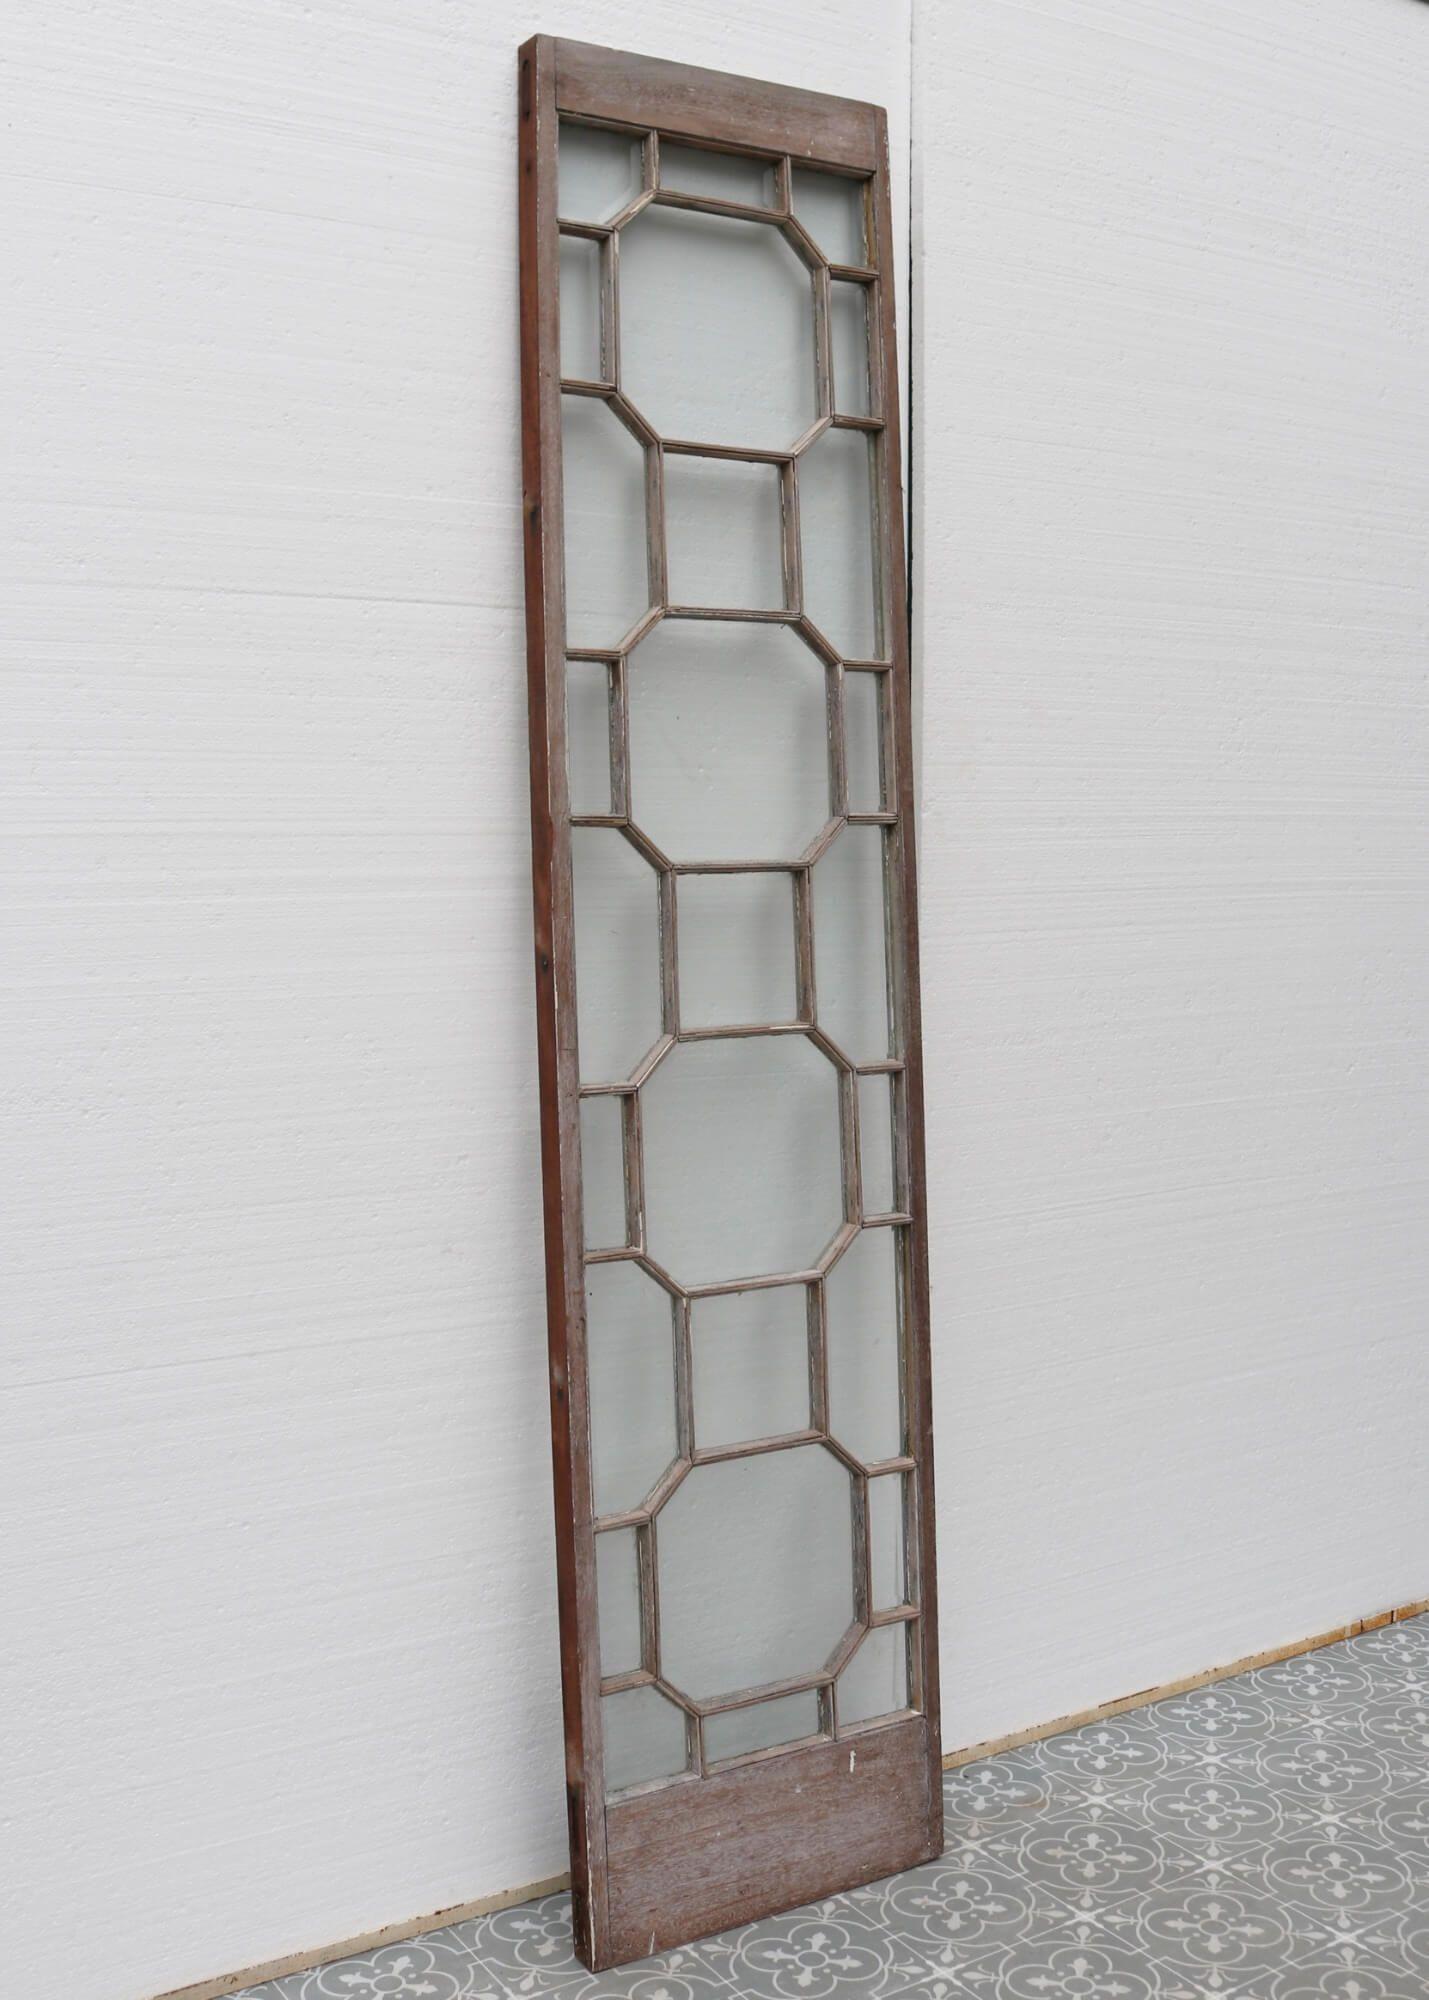 A classy and stylish mahogany and glass panel dating from the late 1880s. Though originating from the Victorian era, this handsome panel is a supremely stylish addition to a 21st century home with its impressive geometric design known as astral